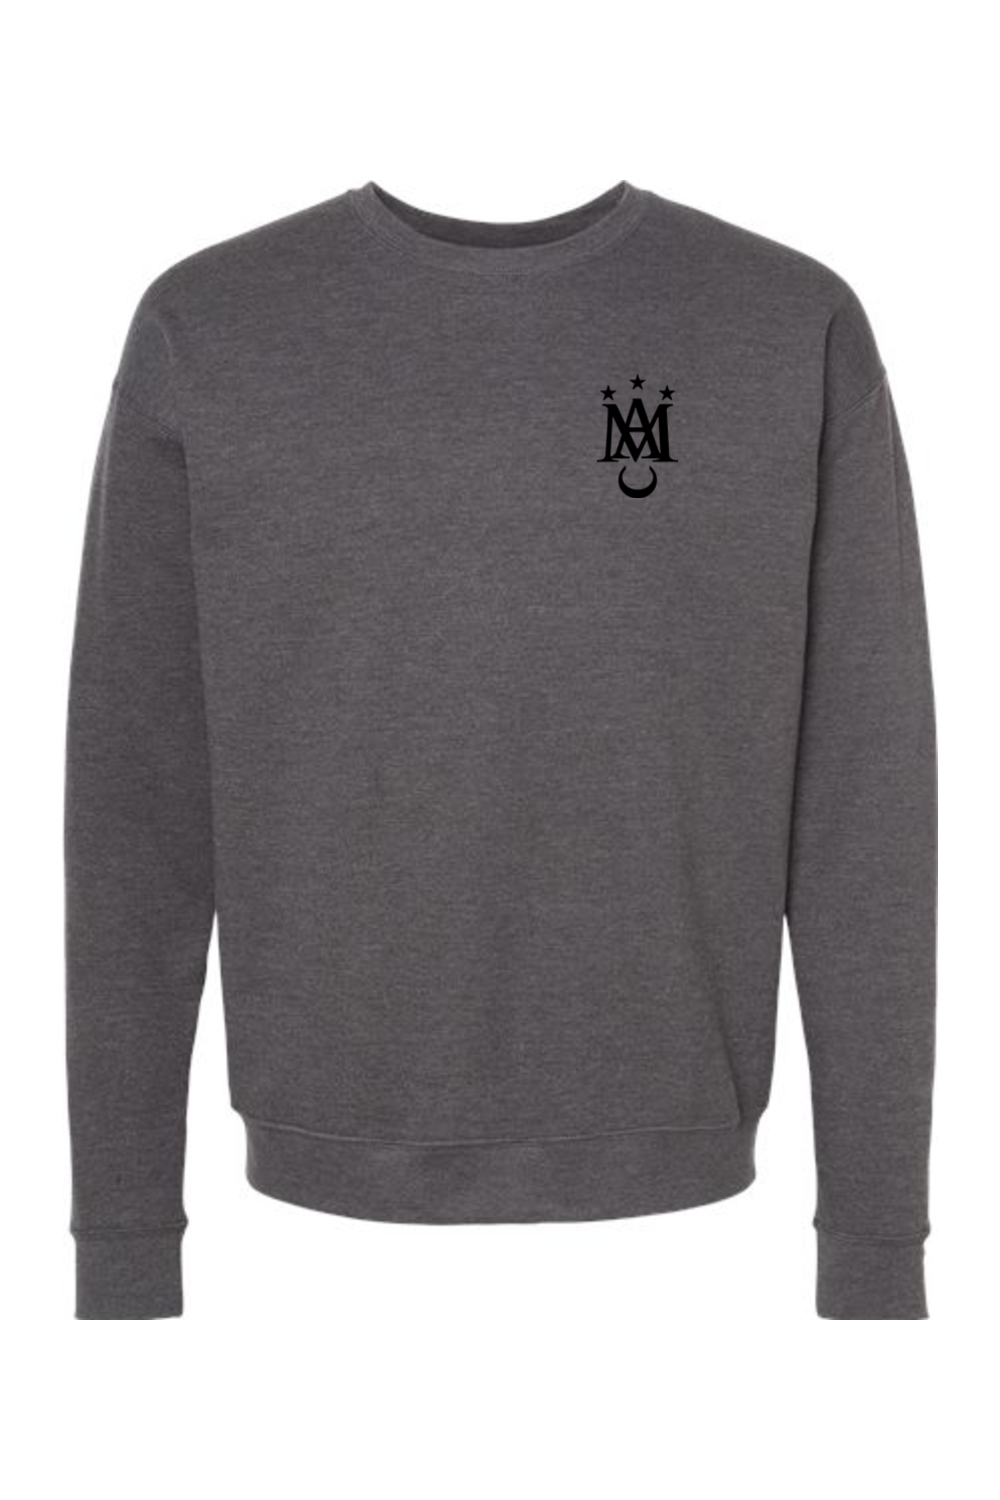 Our Lady of the Visitation Logo Crewneck